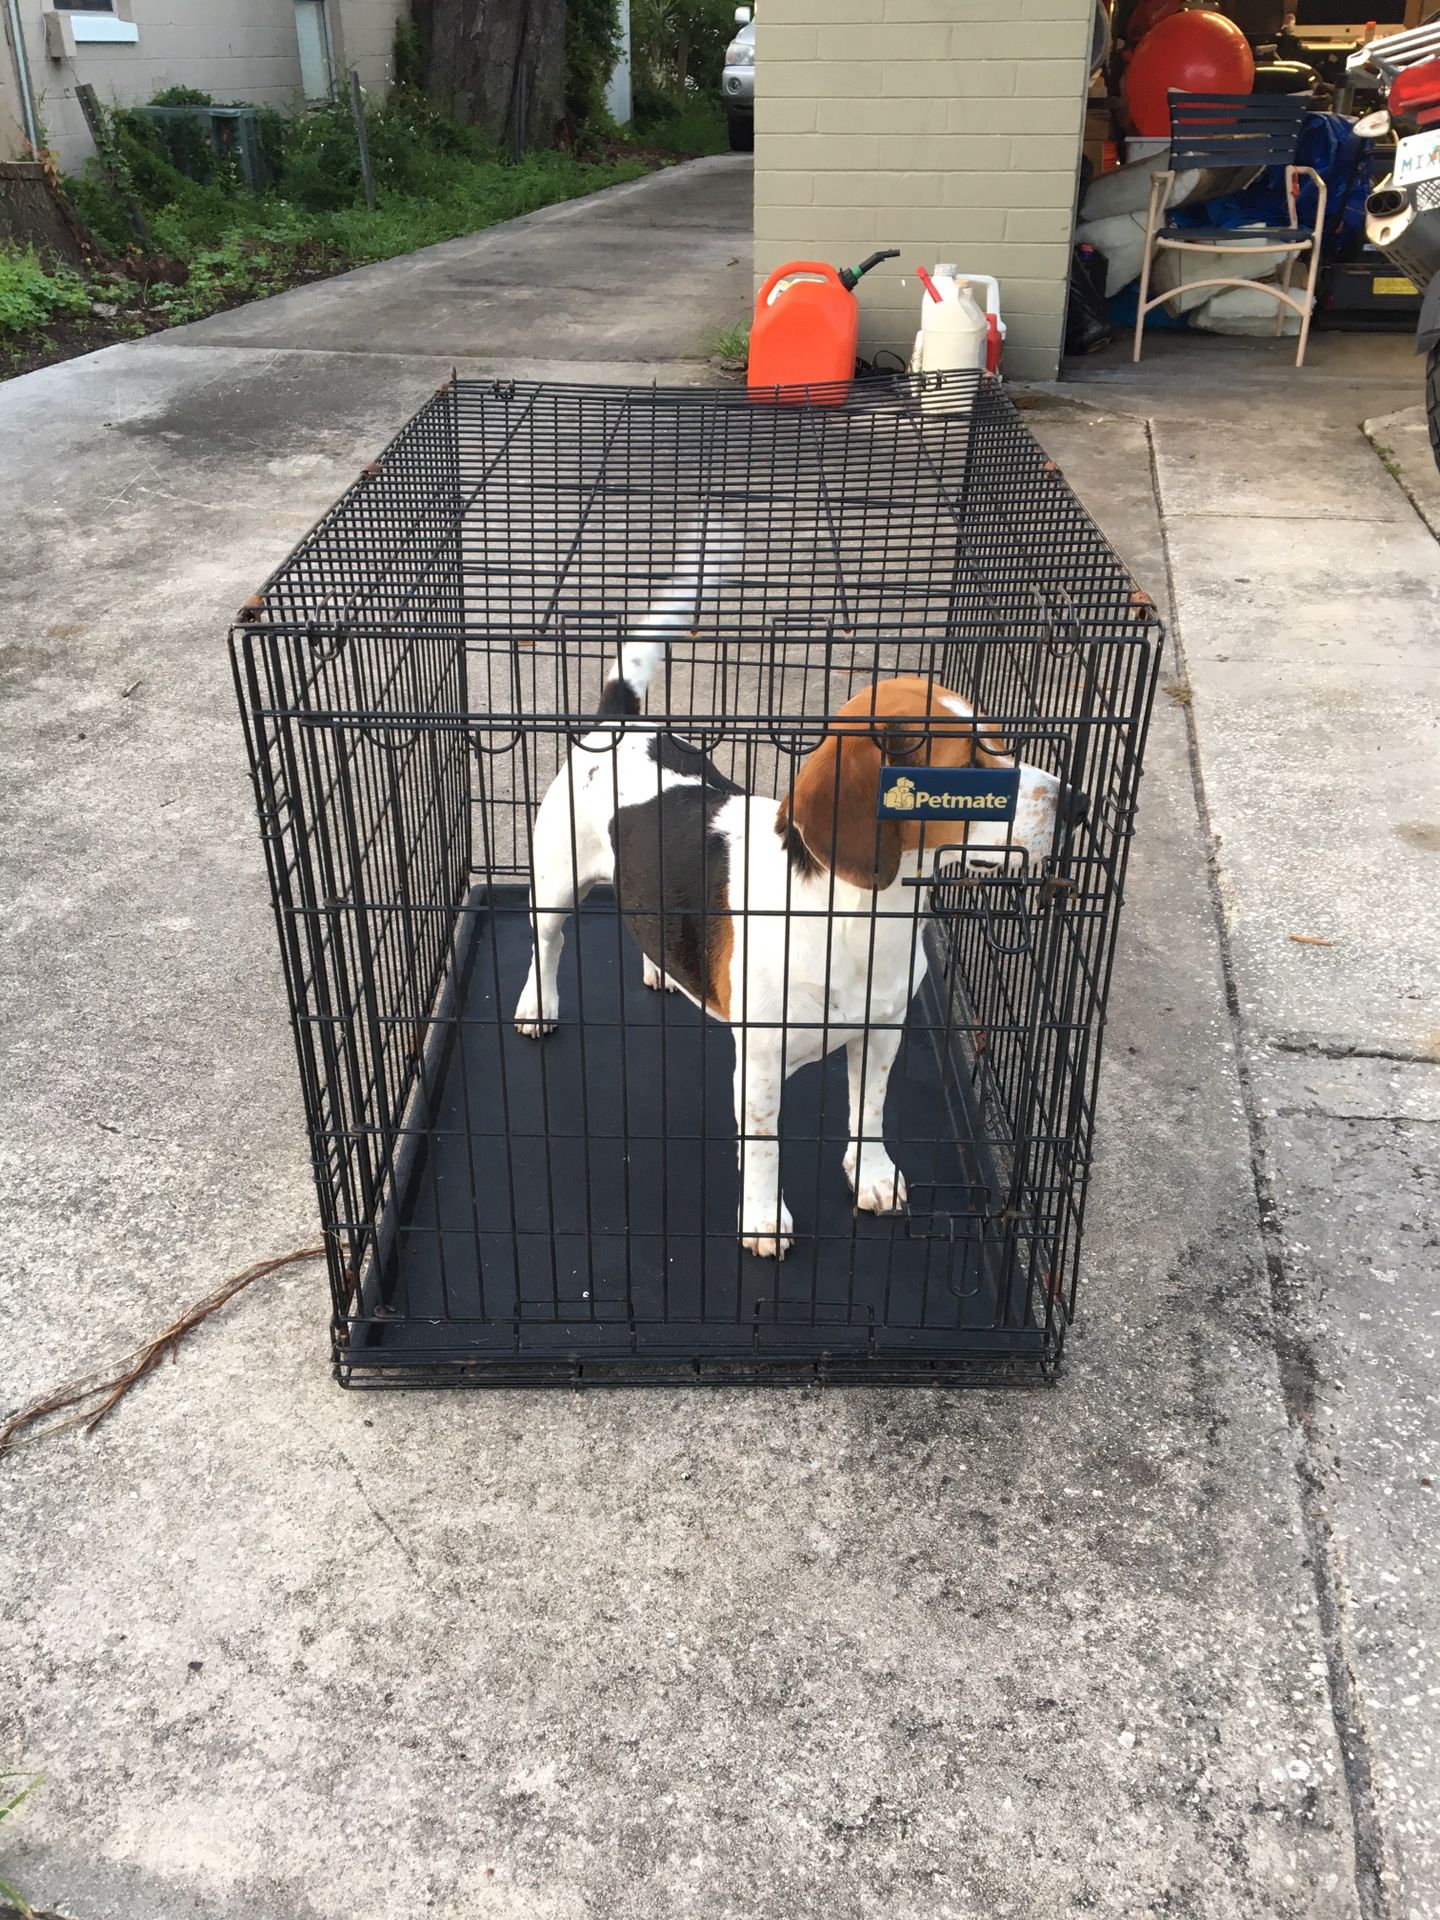 Collapsible dog kennel